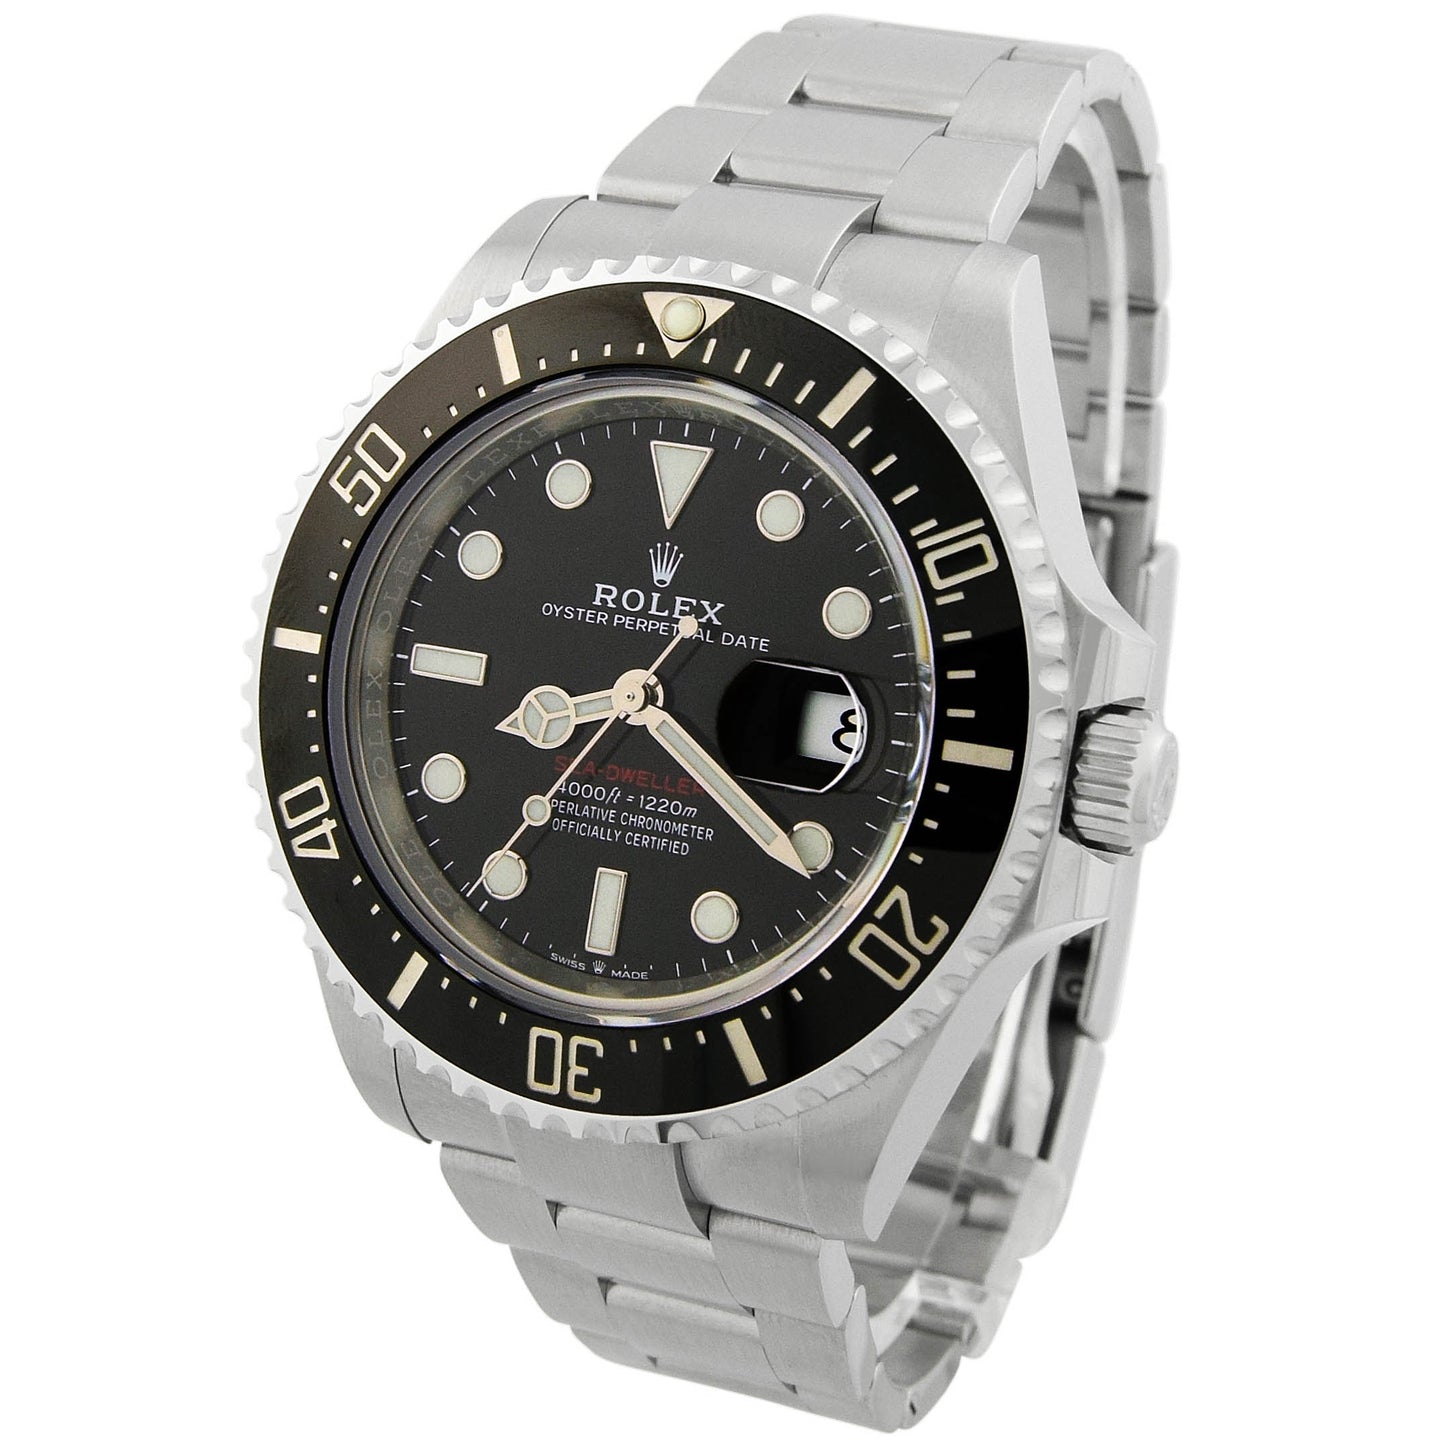 Rolex Sea Dweller "50th Anniversary" Steel 43mm Black Dot Dial Watch Reference# 126600